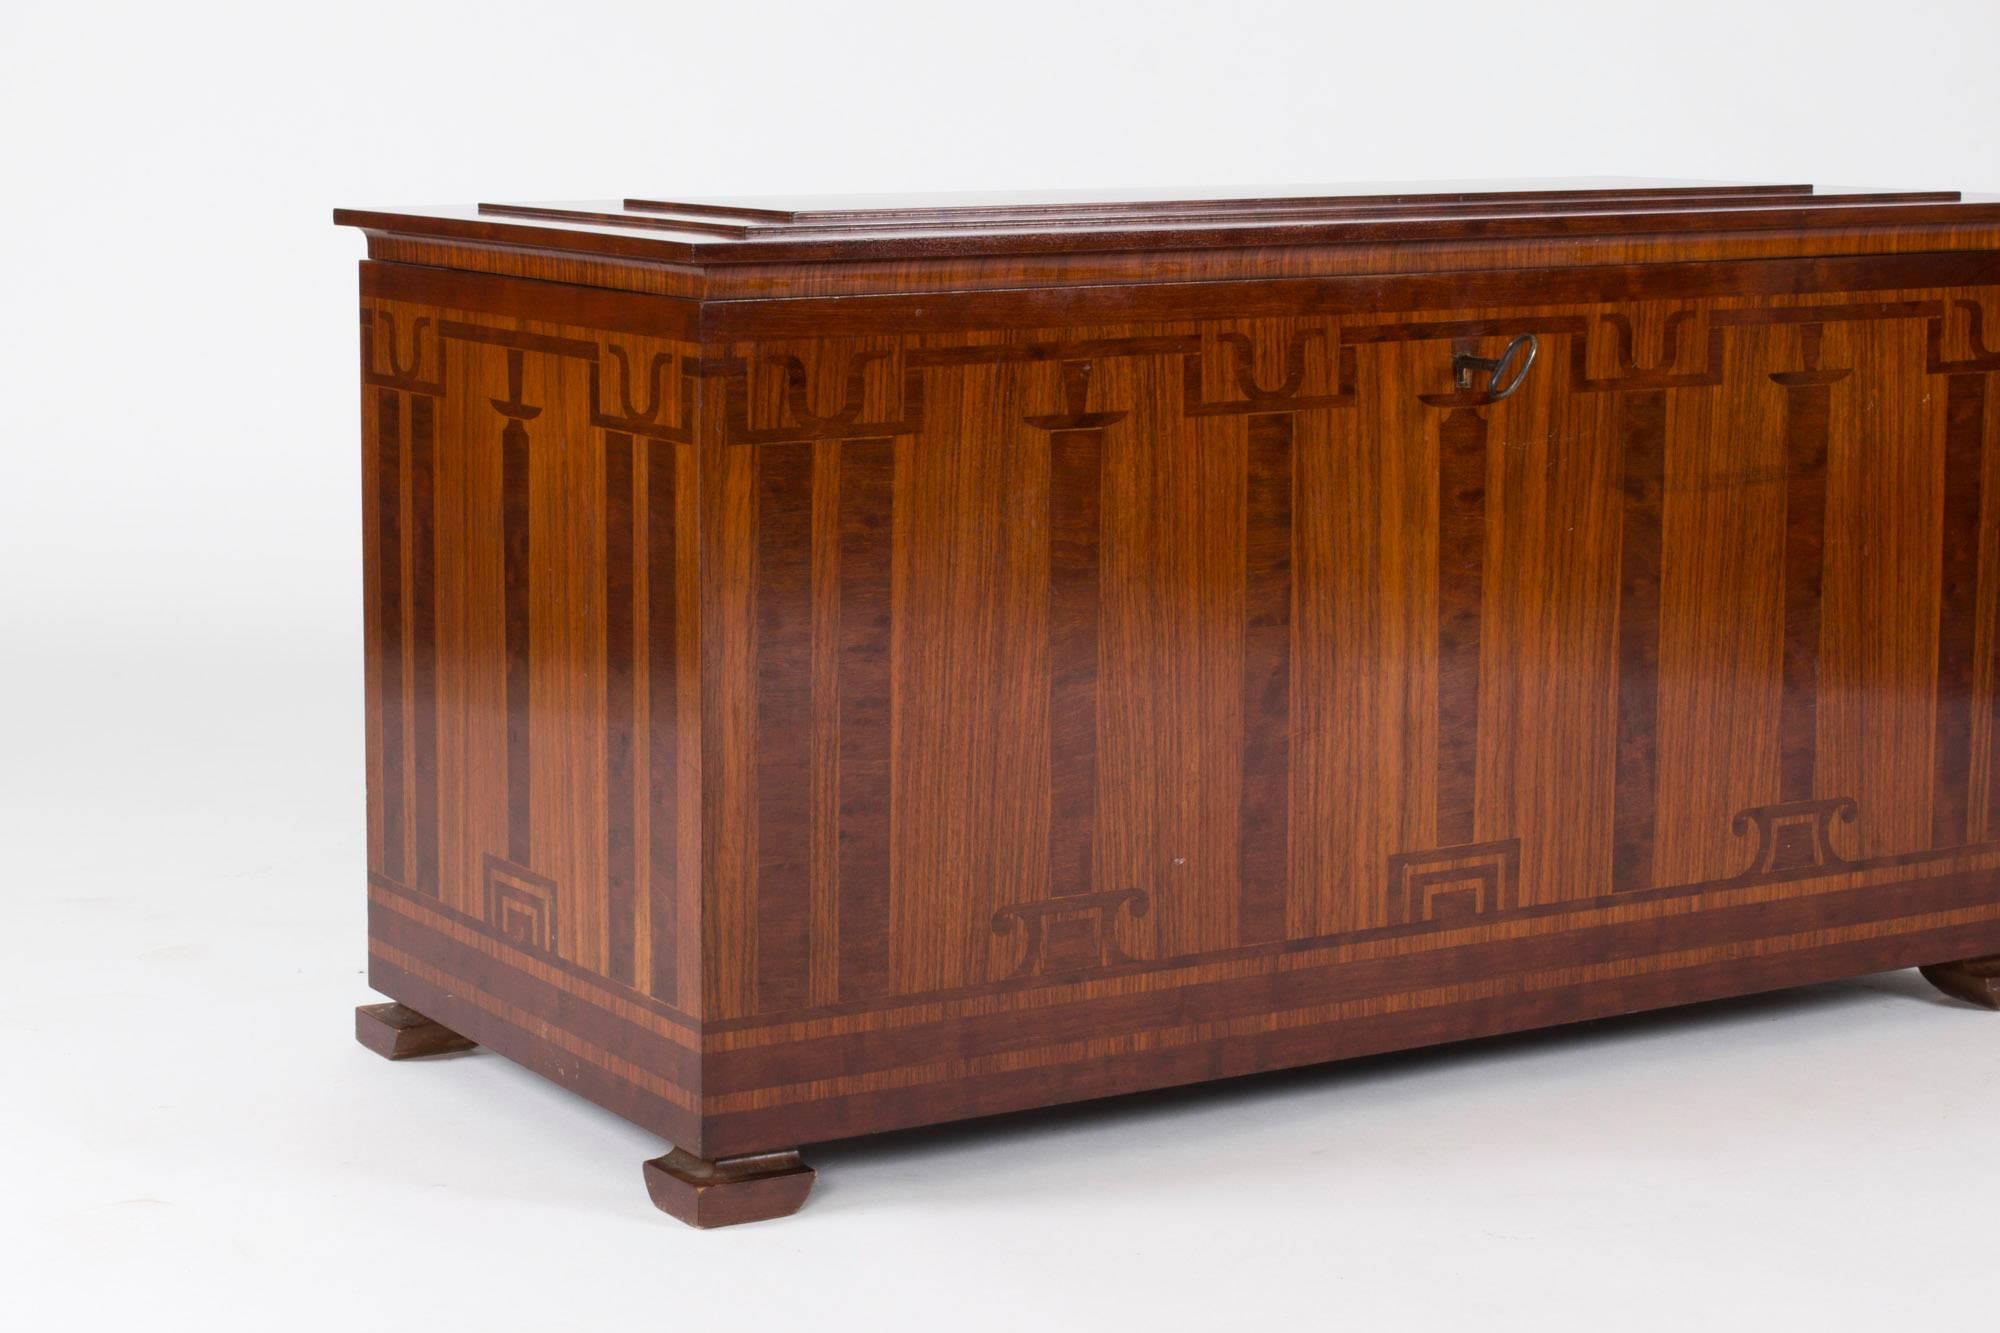 Birch Art Deco Chest with Inlays by Carl Malmsten